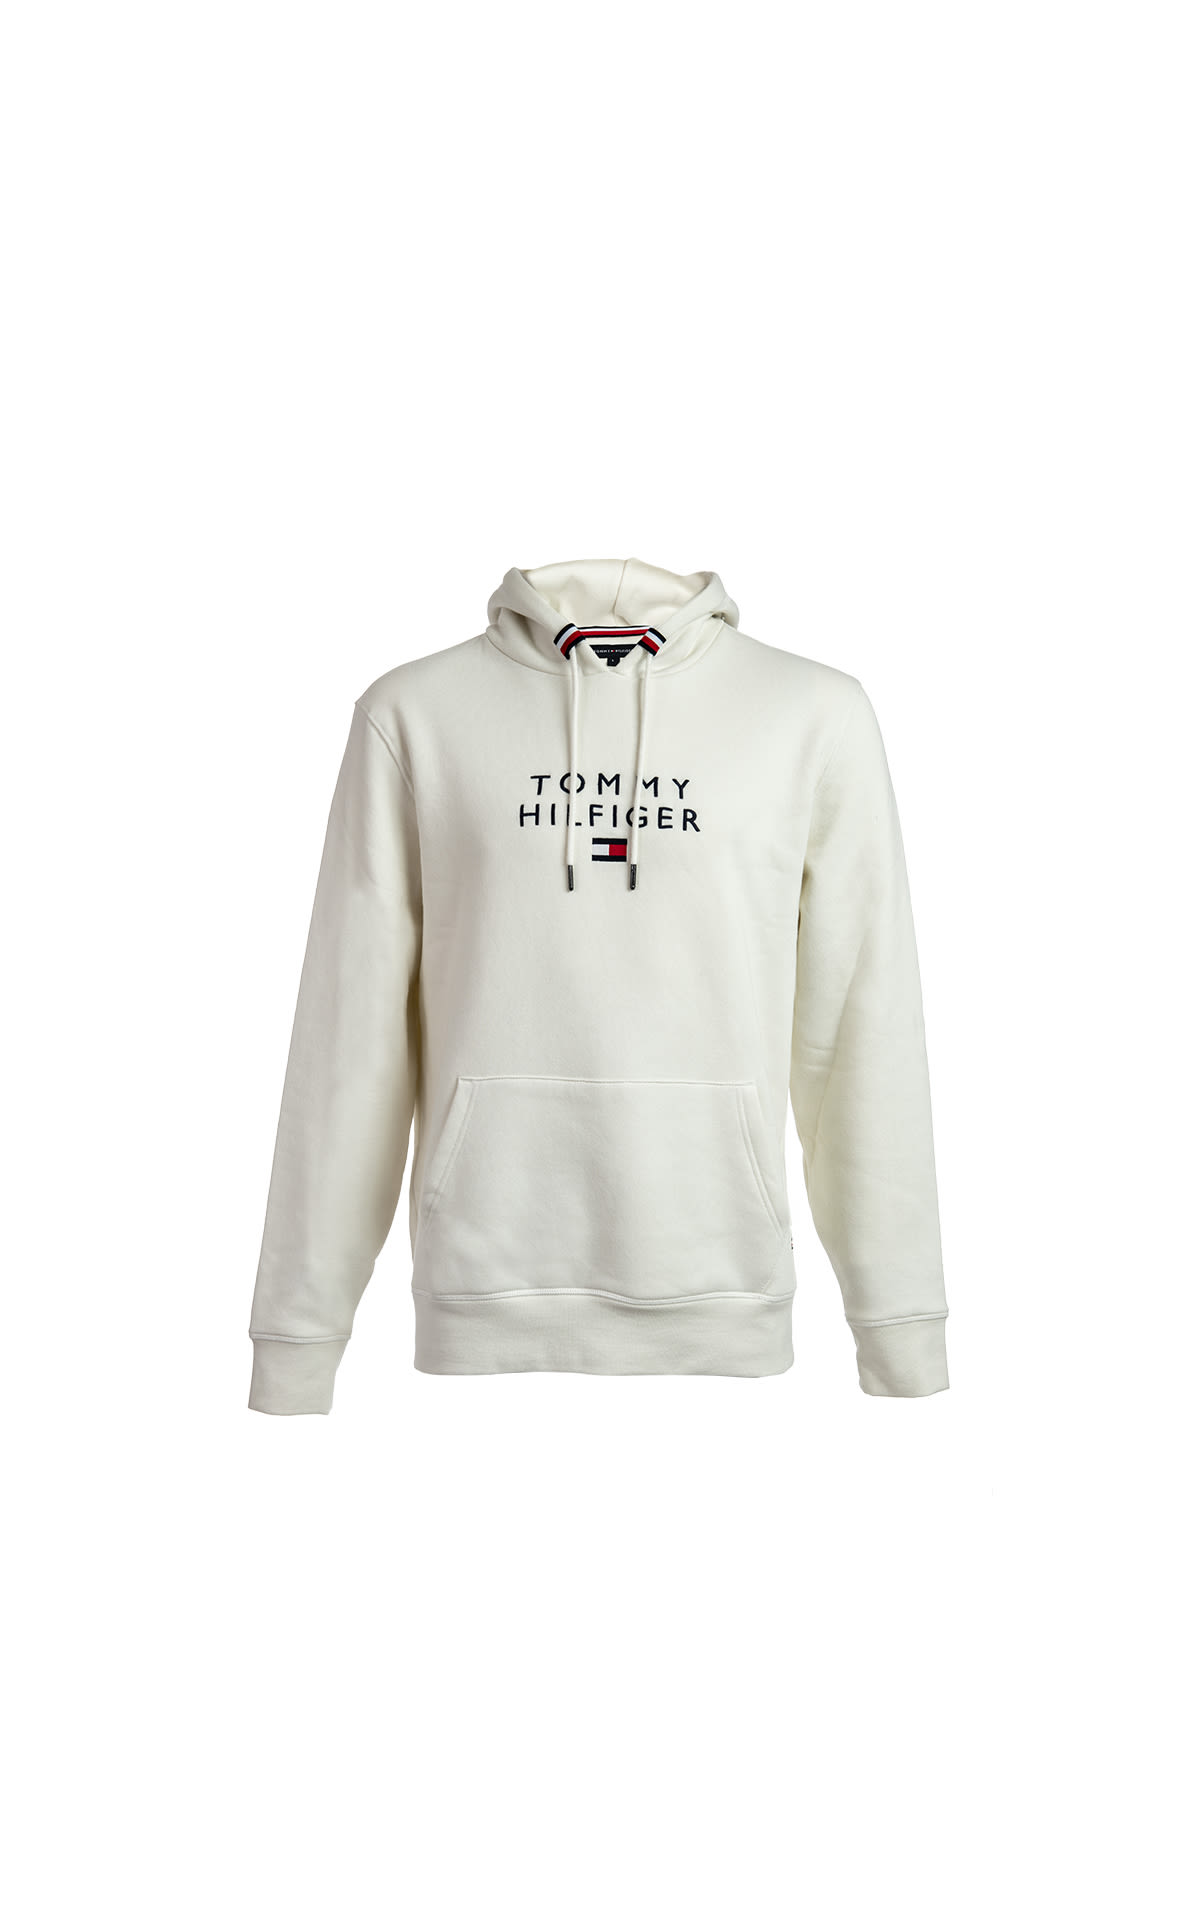 Tommy Hifiger White hooded